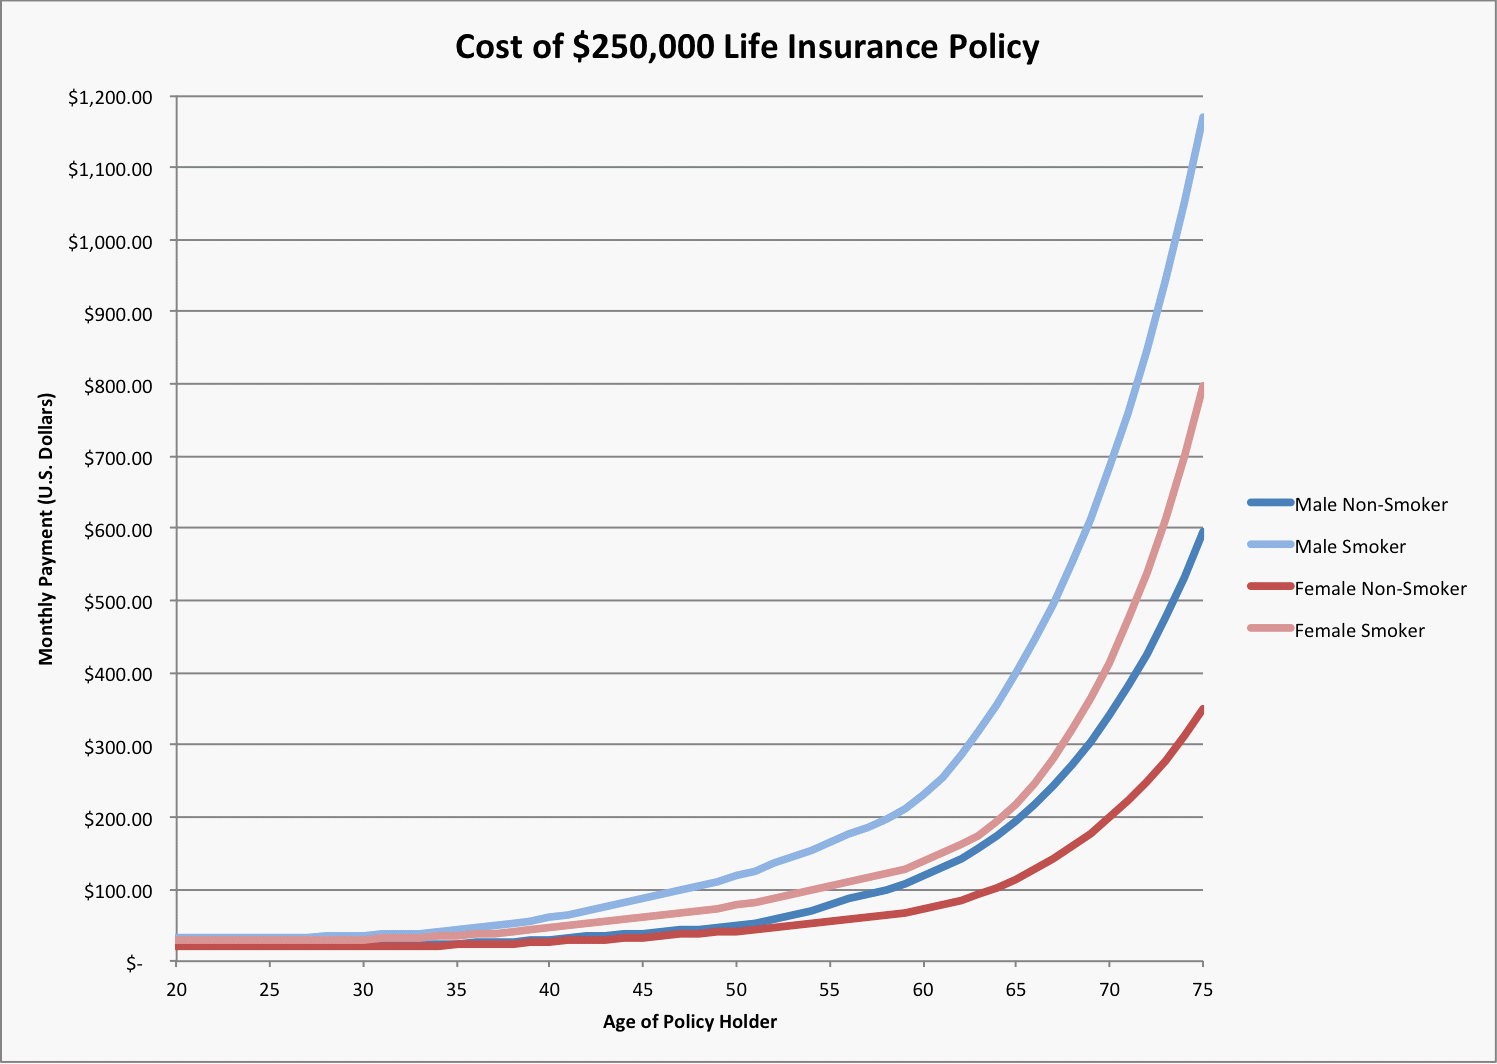 Cost of Life Insurance Policy by age and gender